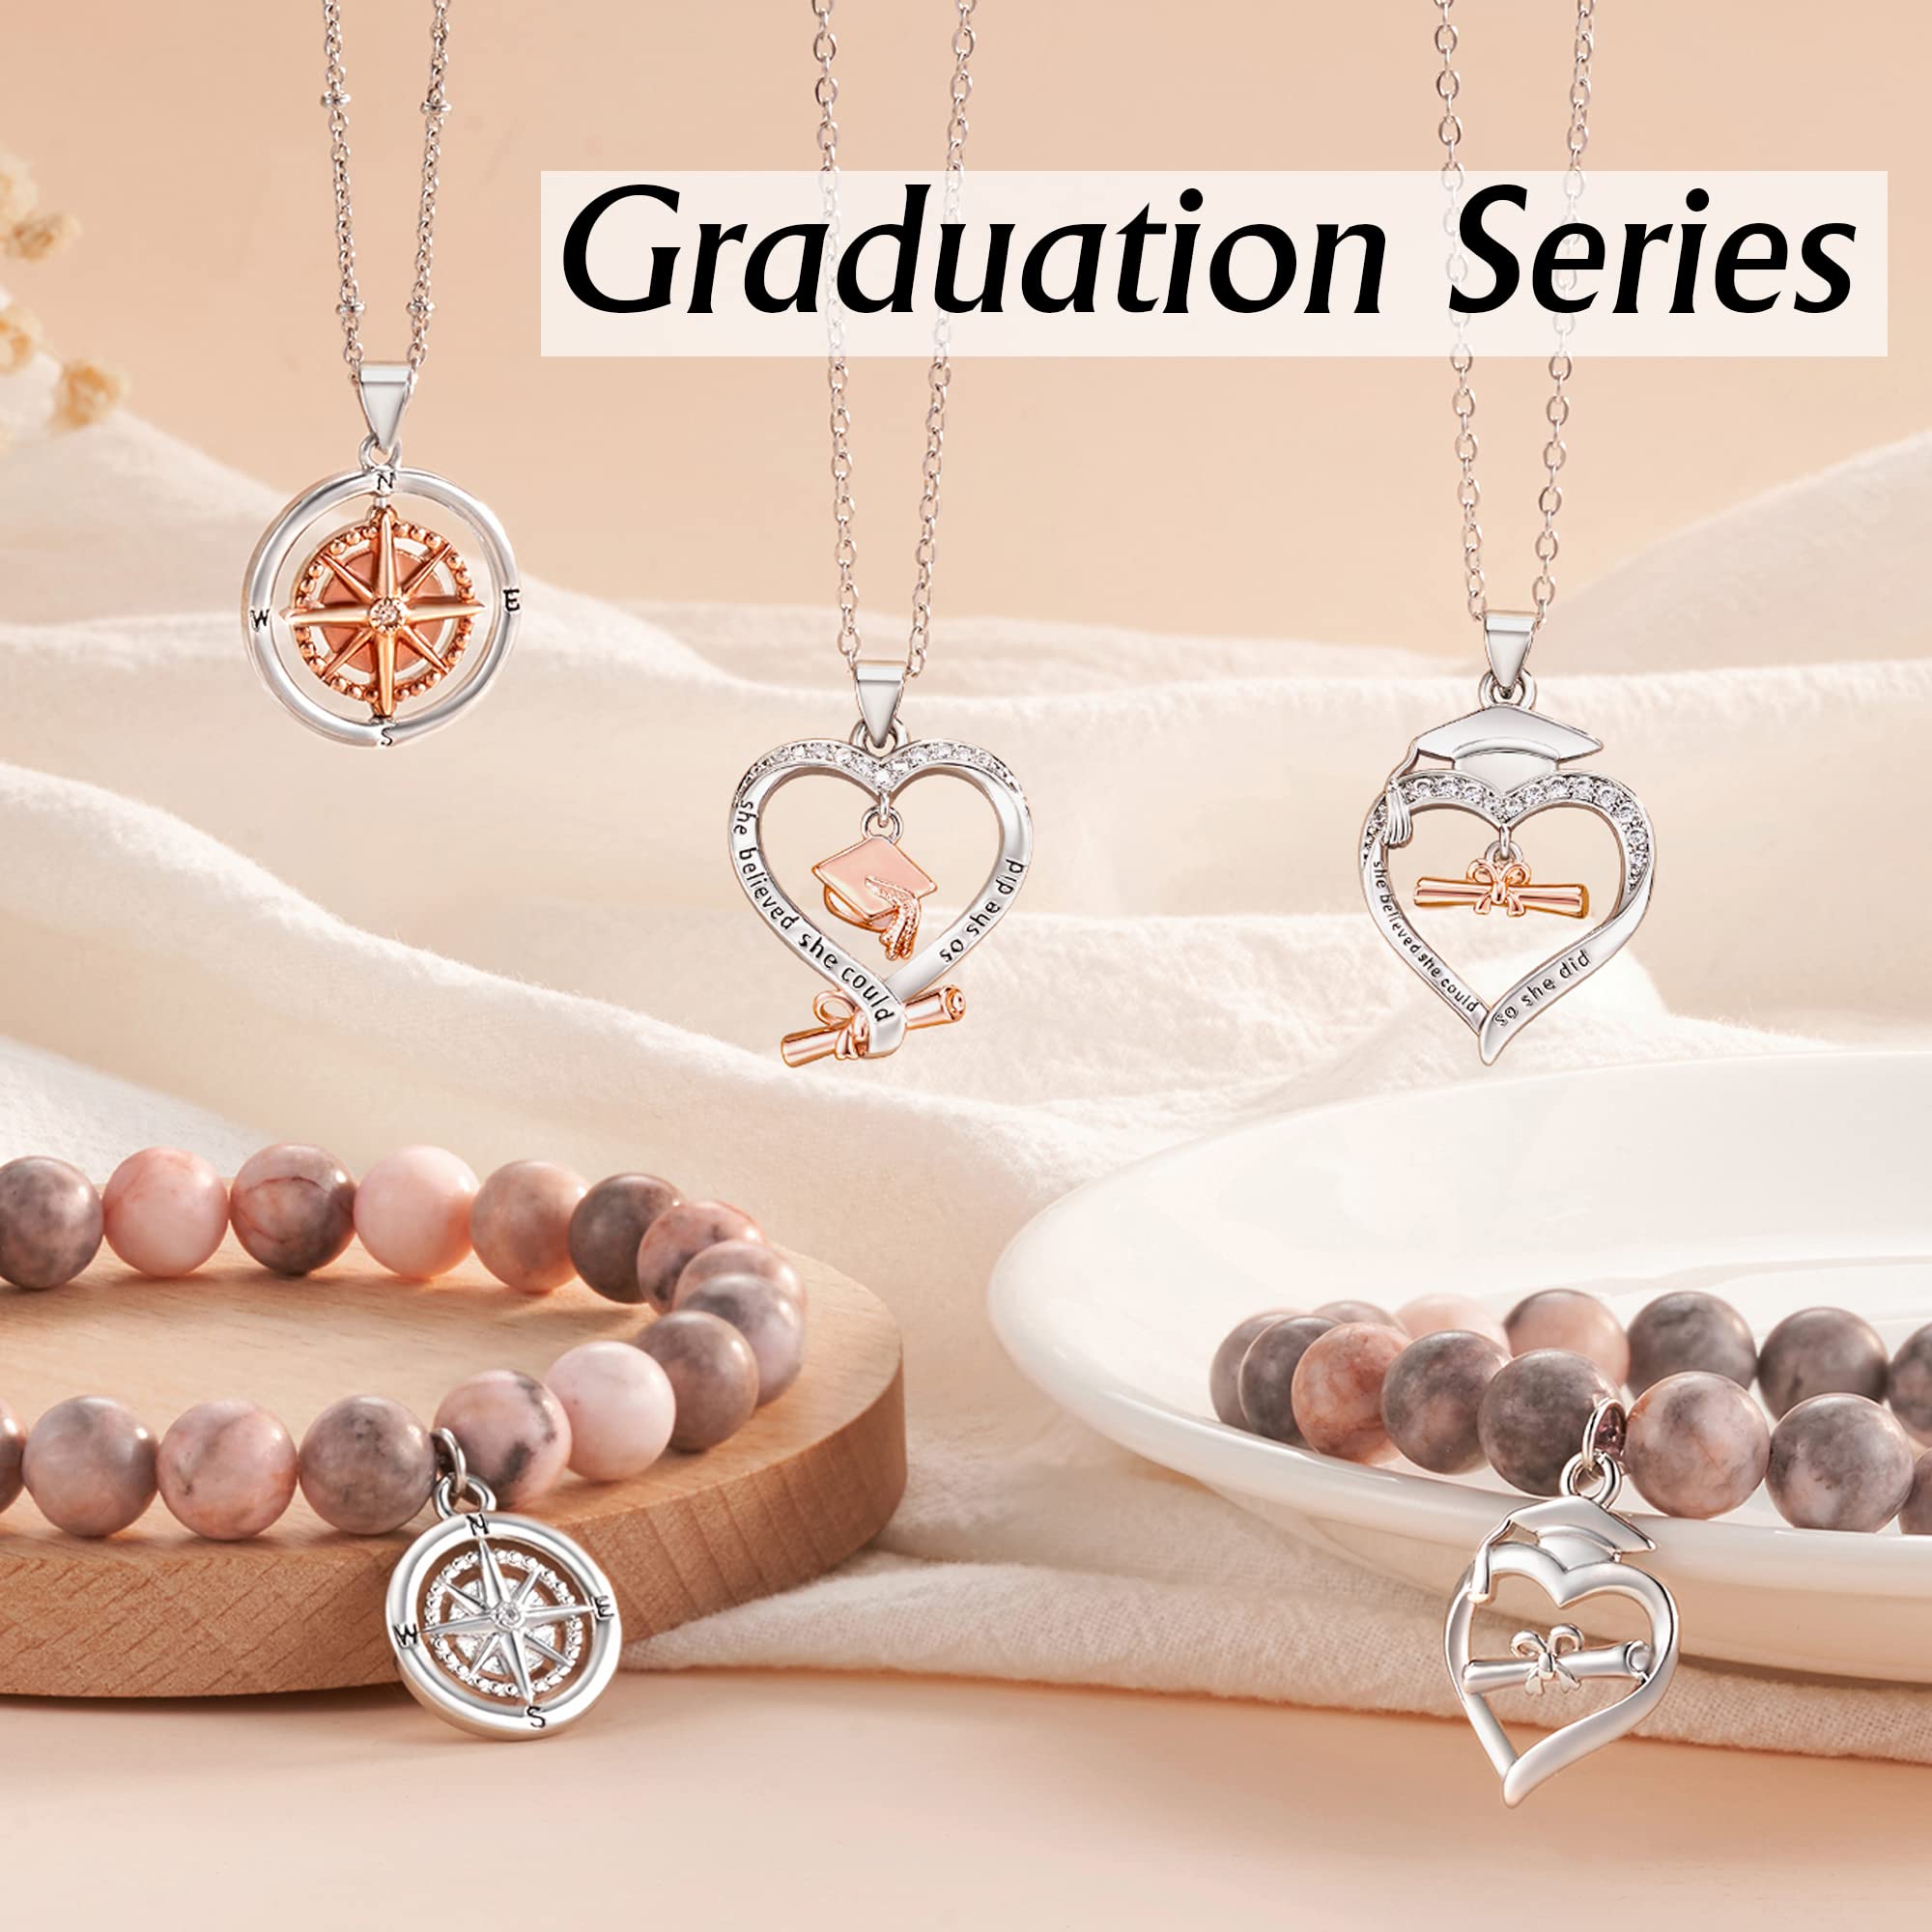 Shonyin Graduation Gifts for Her 2023, Heart Bracelet 5th 8th 6th College Law Middle High School Master Degree Nurse Phd Graduation Jewelry Gifts for Girls Daughter Best Friend